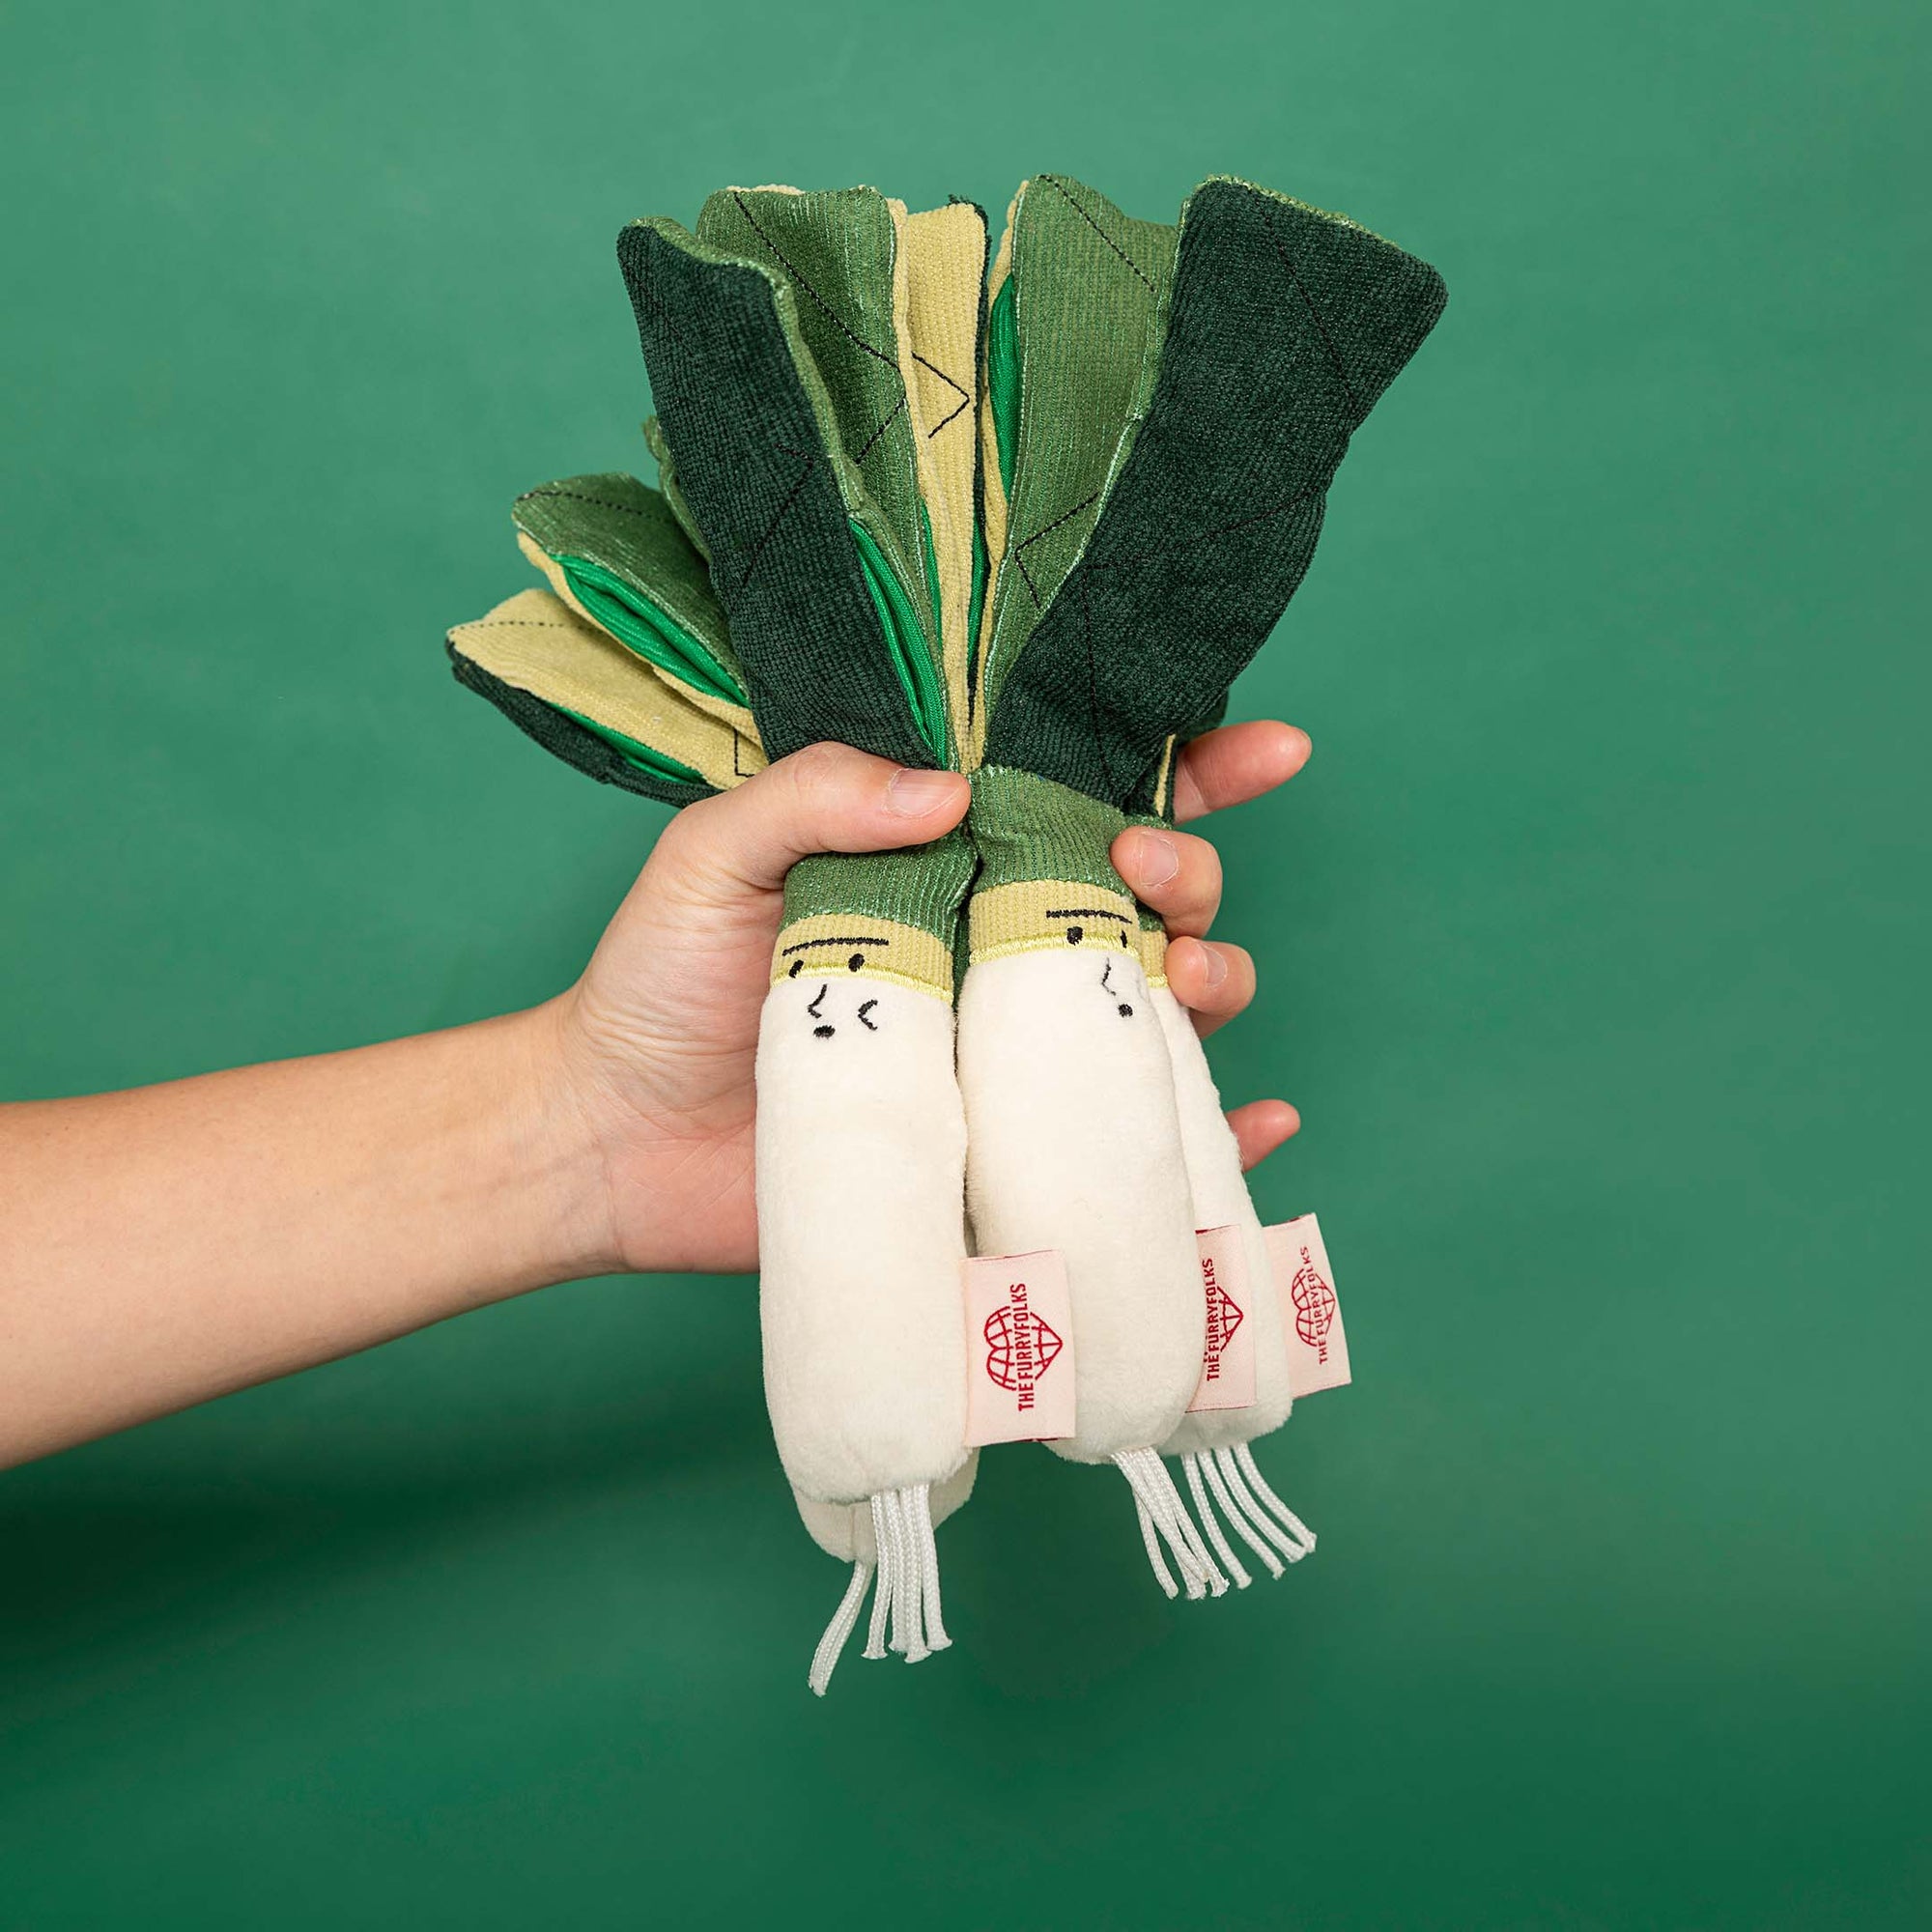 a pair of white and green onion-shaped dog toys being held up against a green background. Each toy has a cute face on the white base and a layered green top representing the onion leaves. The toys are designed for dog engagement, likely intended for interactive play or scent work. The hands holding the toys suggest they are being offered for play, showcasing the interactive nature of the toys.